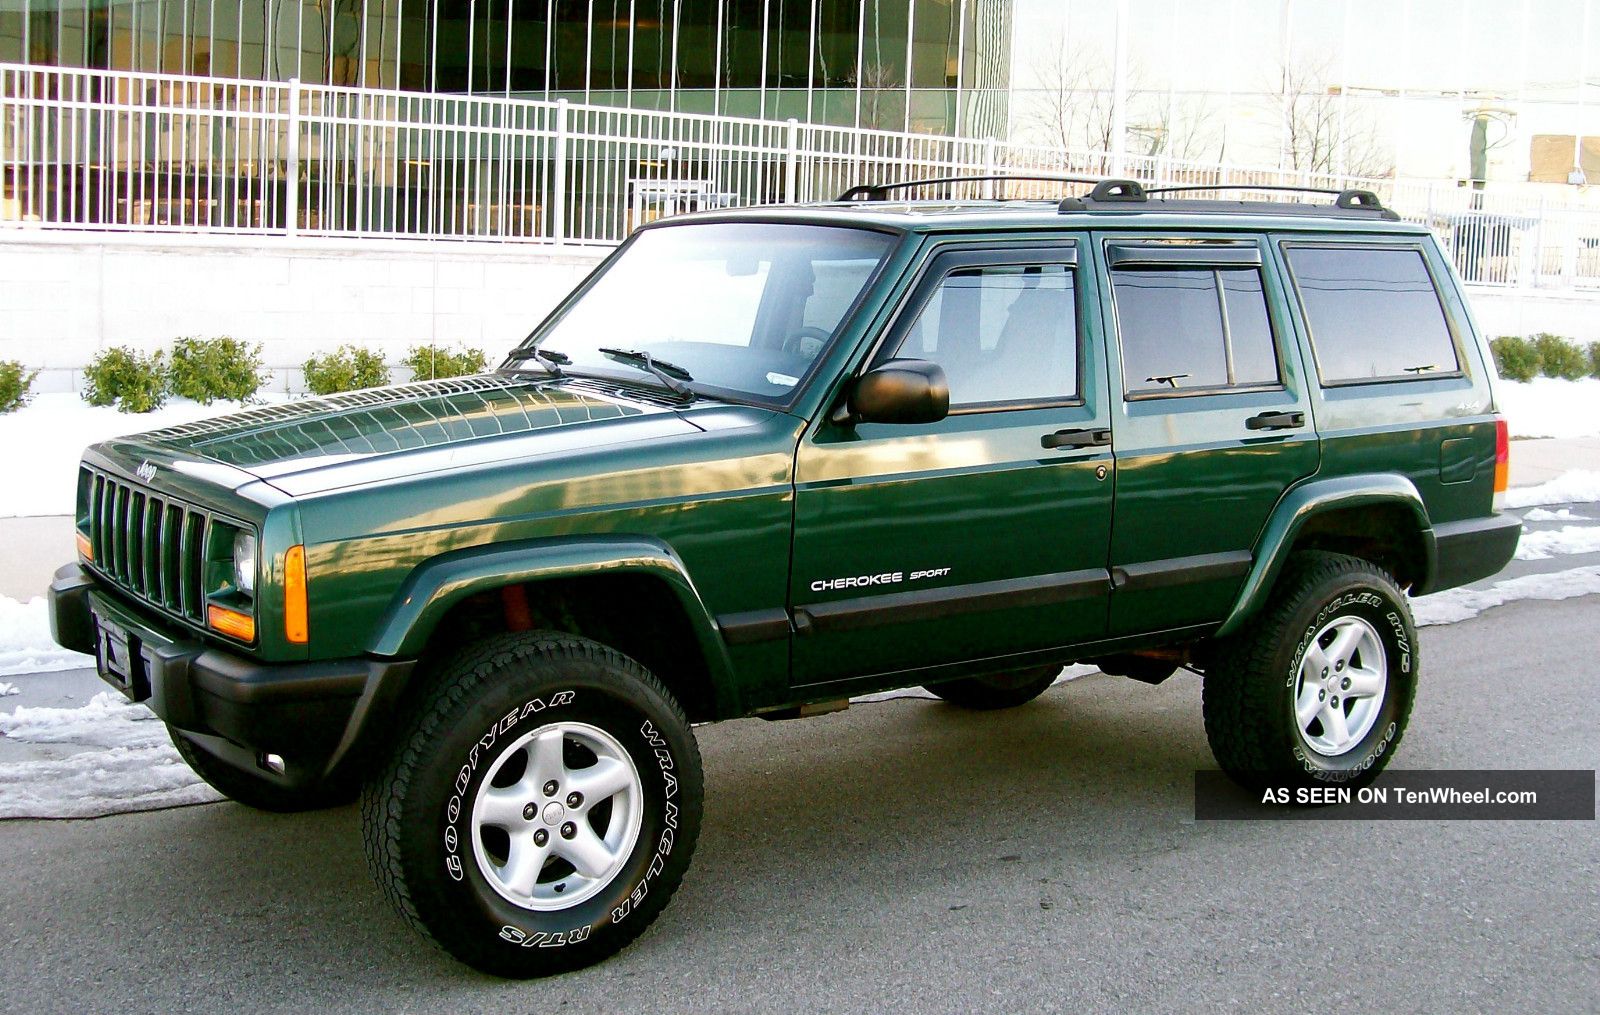 2001 Cherokee jeep lifted picture #1